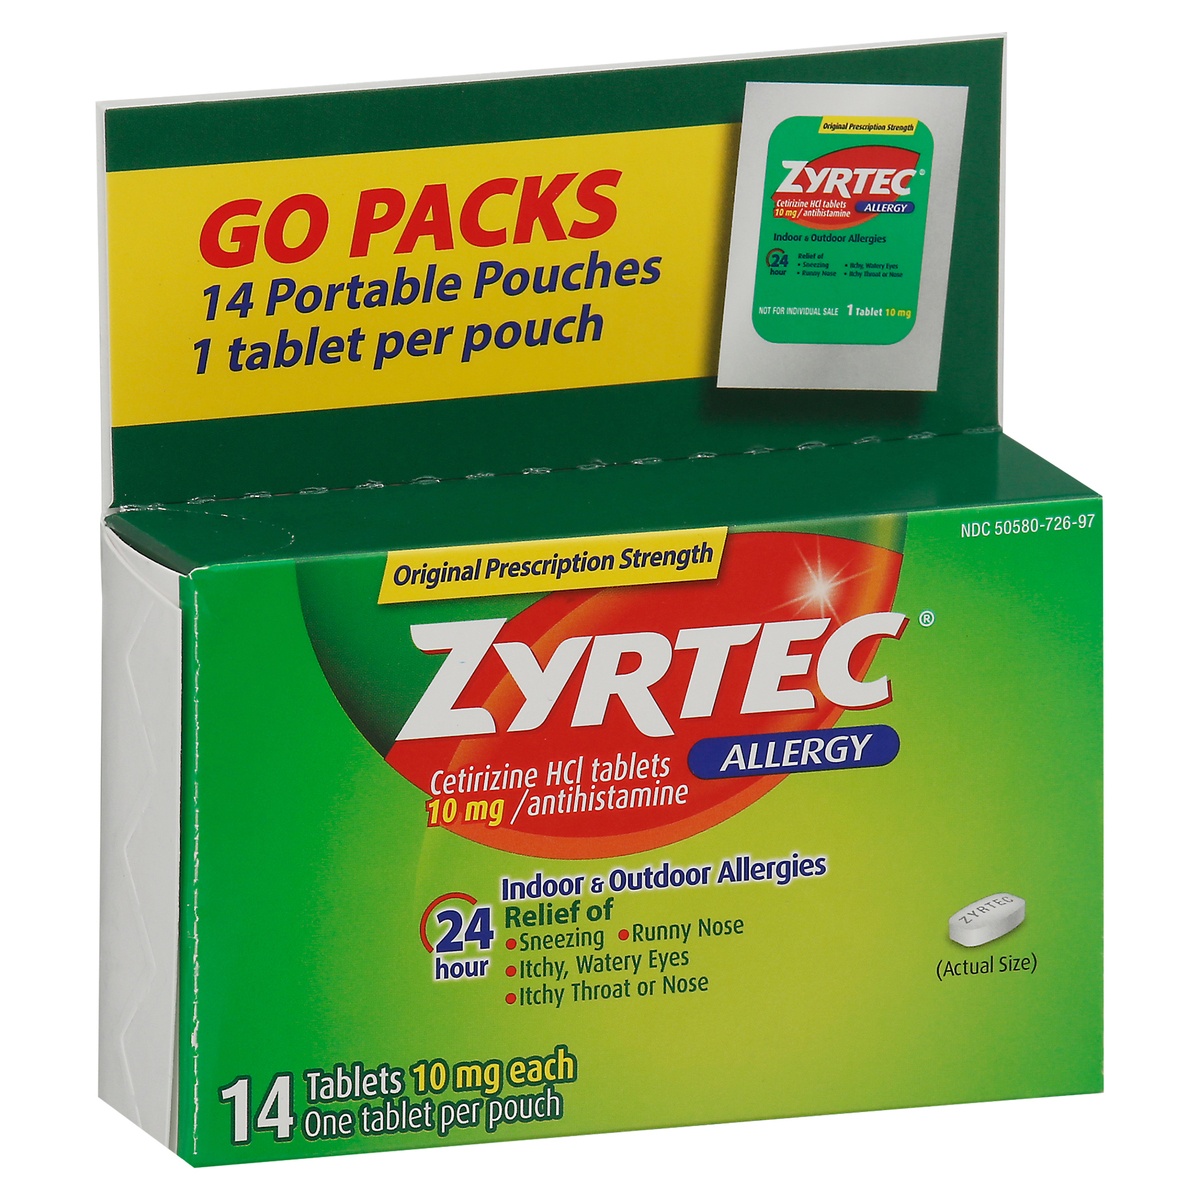 slide 5 of 9, Zyrtec 24 Hour Allergy Relief Tablets, Indoor & Outdoor Allergy Medicine with Cetirizine HCl per Antihistamine Tablet, On-the-Go Relief, Individual Travel Pouches, (14, 14 ct